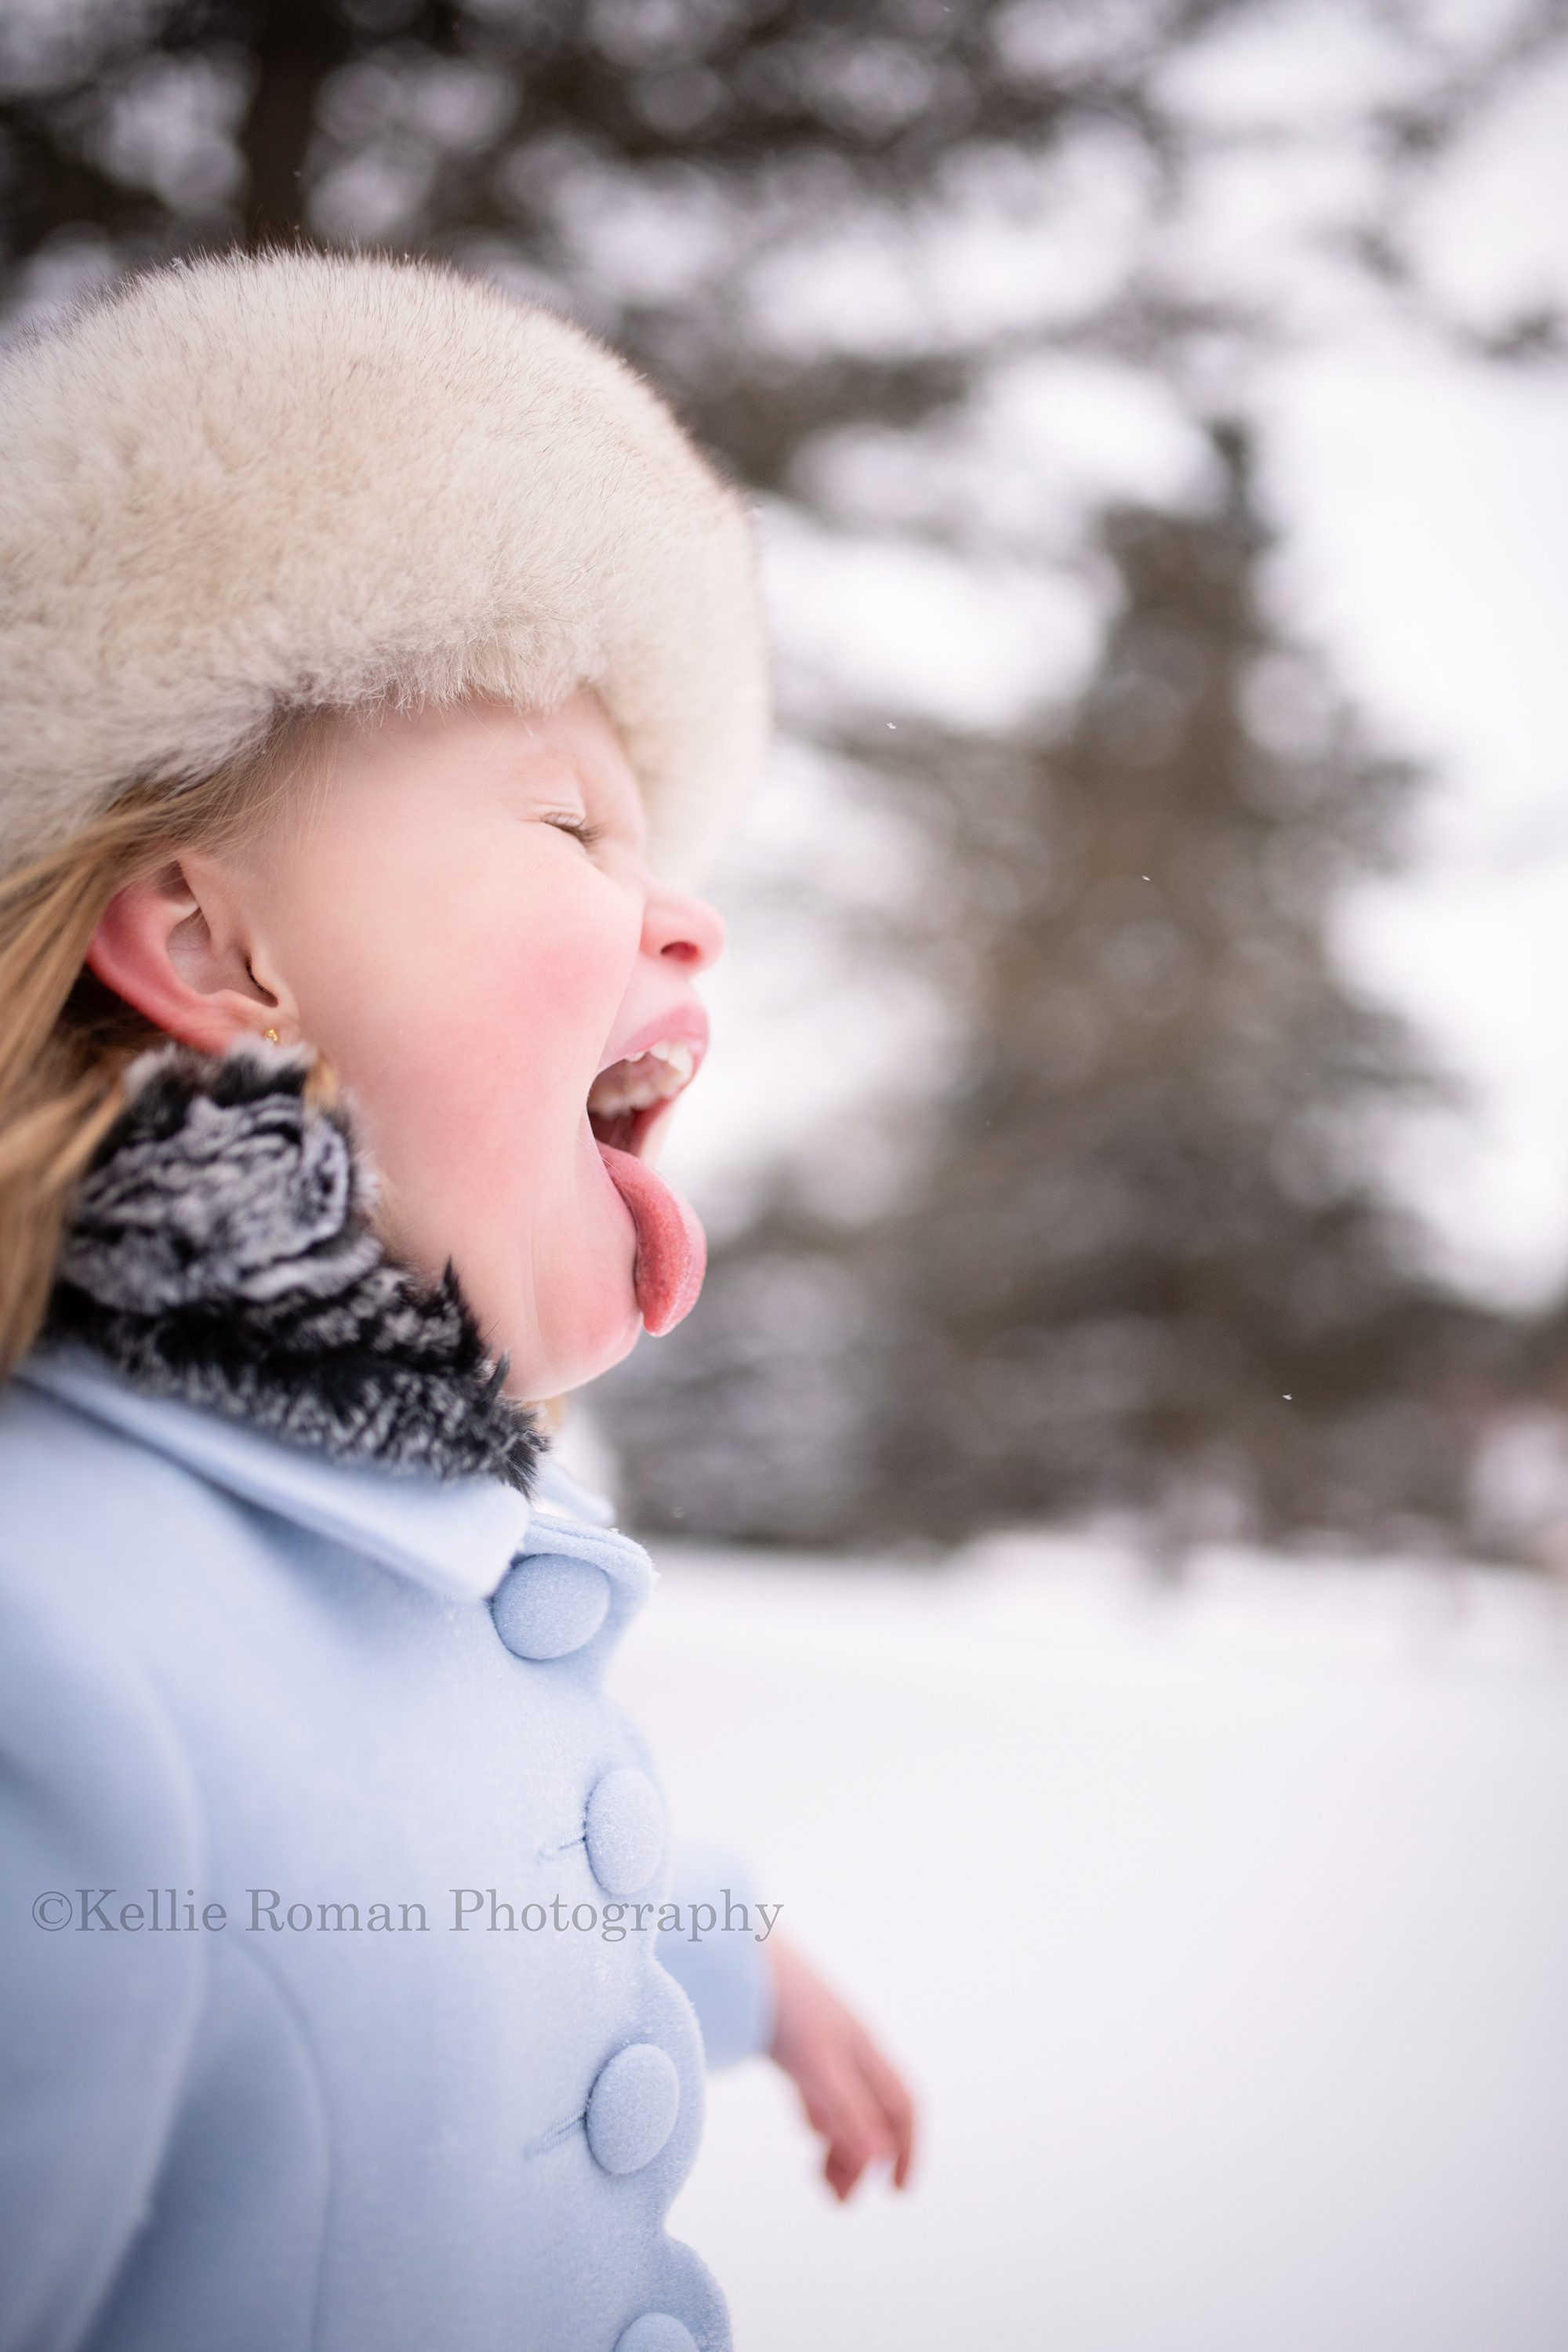 milwaukee snowfall a young 5 year old girl is outside in the snow in a Milwaukee County park. She has a powder blue pea coat on and a white fur hat. The image is a profile shot and she's sticking her tongue out with snow on it. She has her eyes closed.